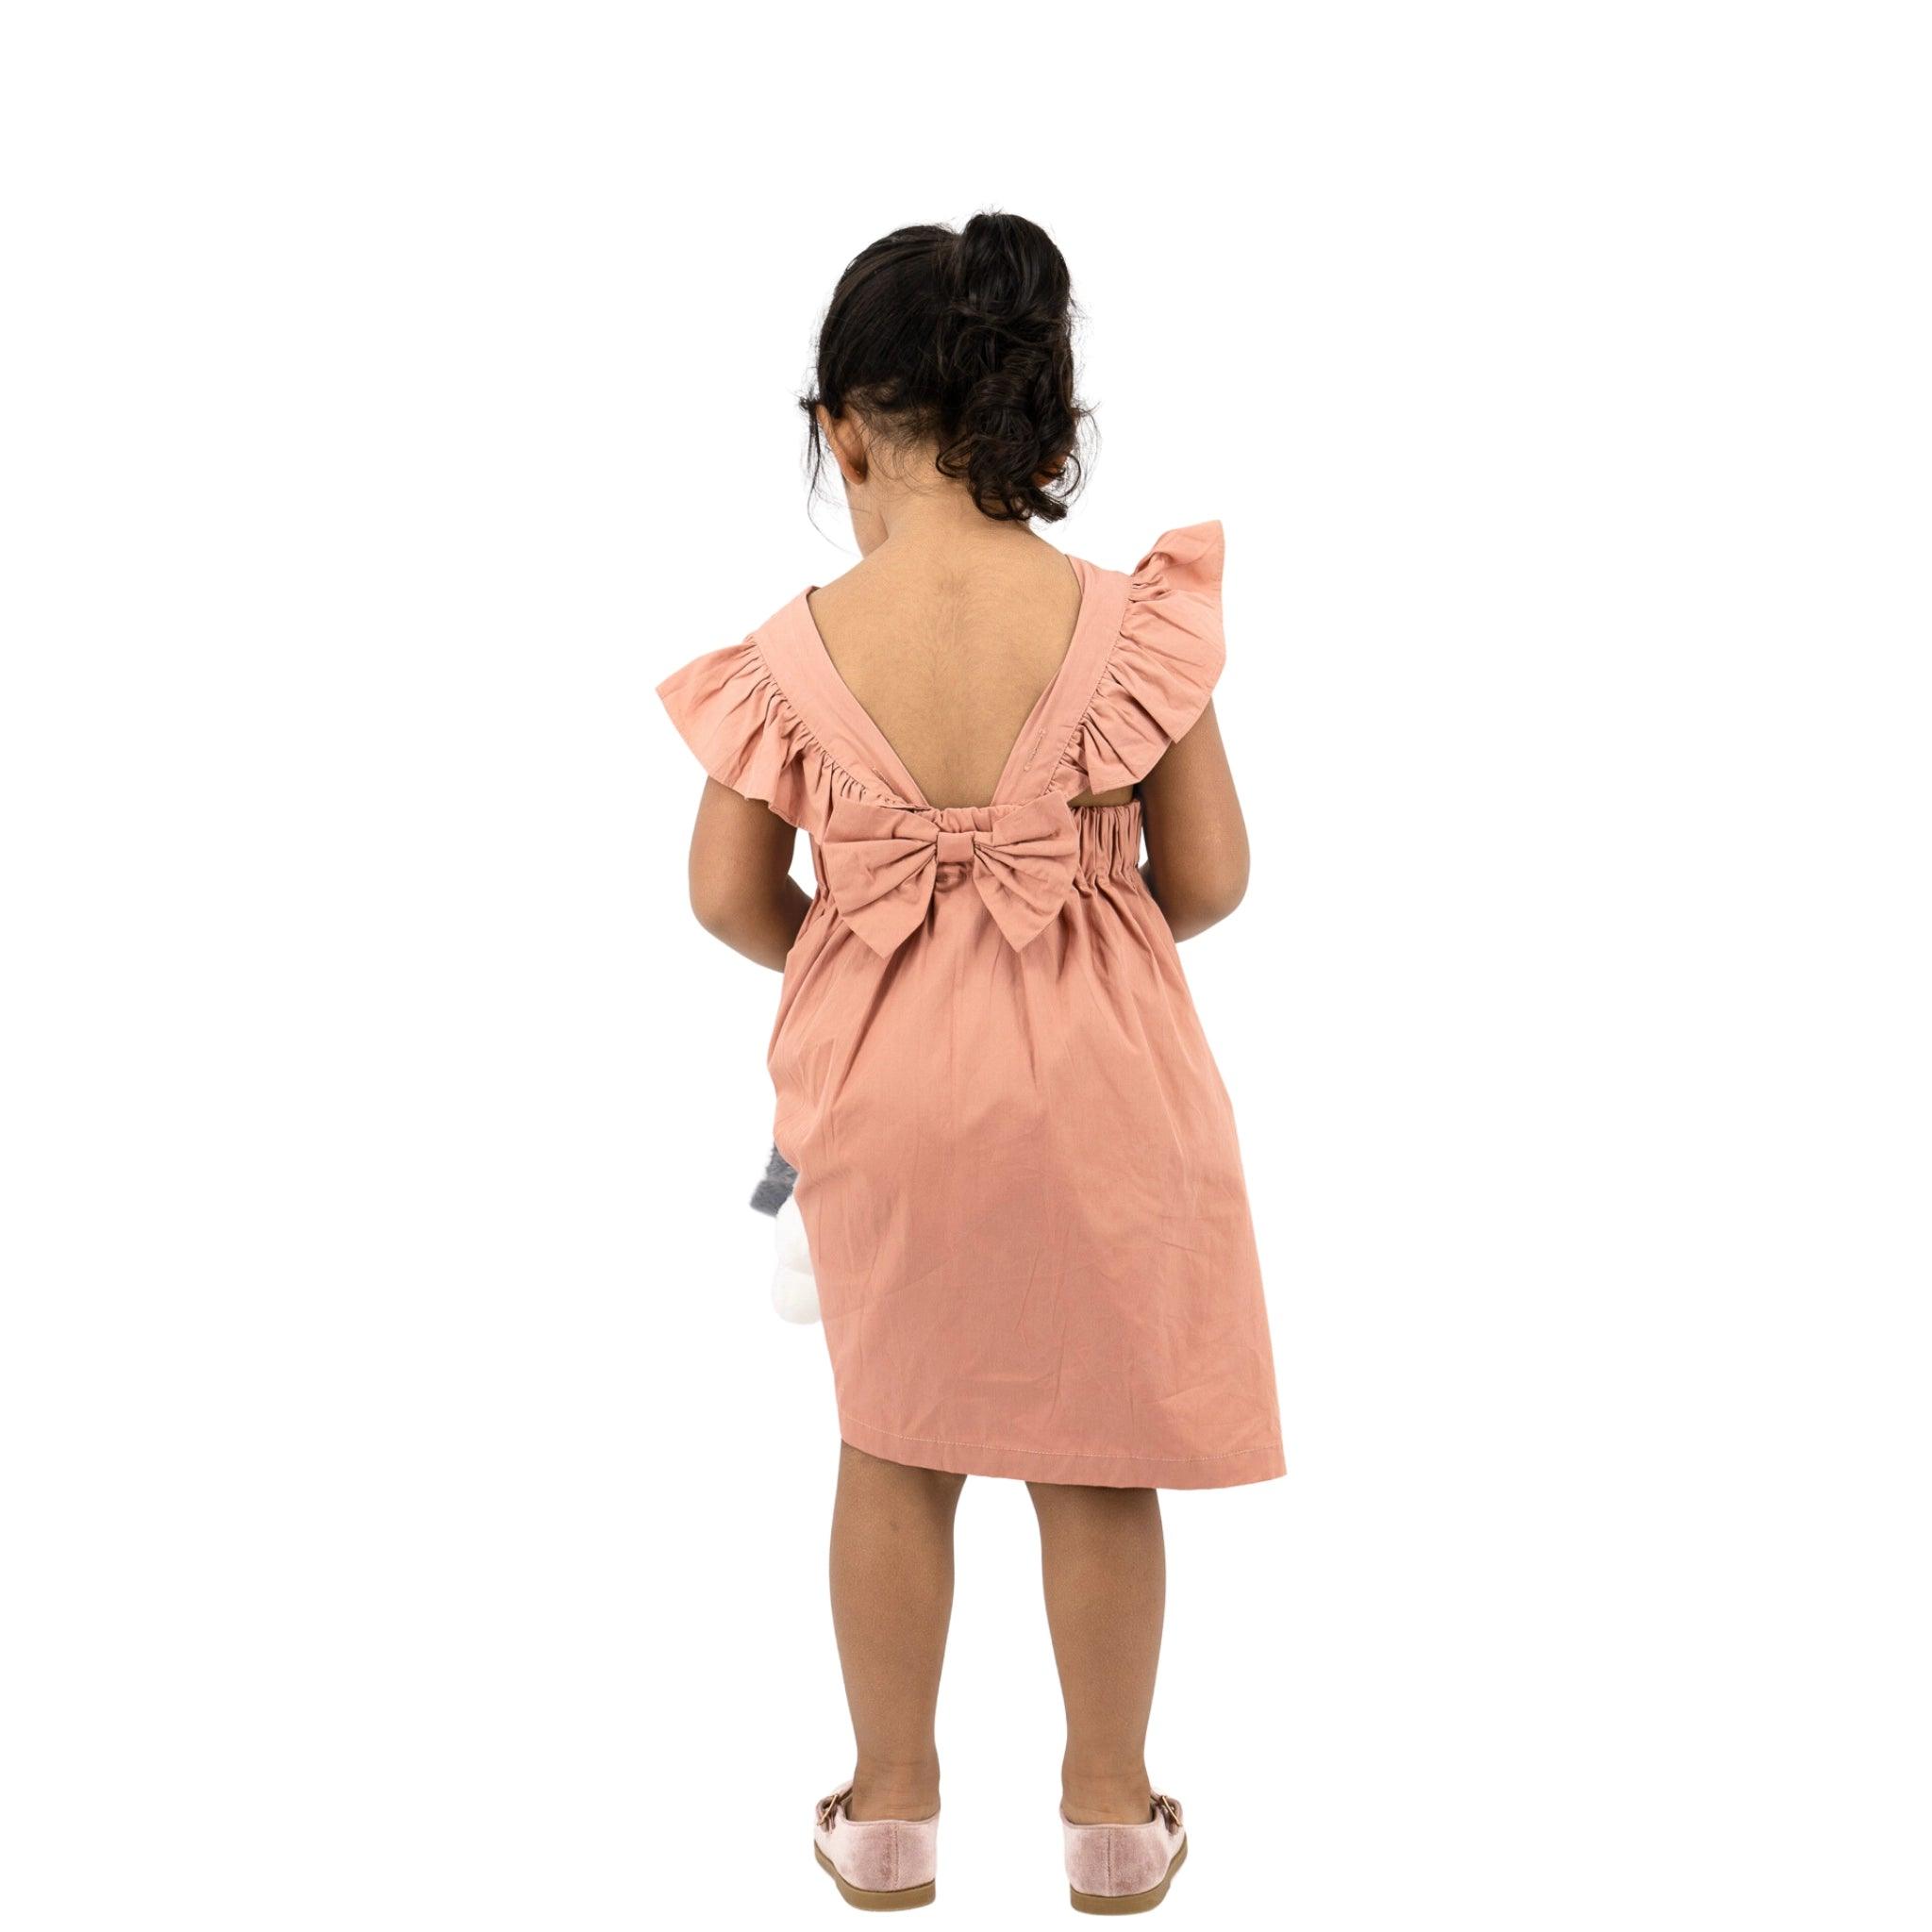 Young girl in a Brick Dust Cotton Floral Dress for Girls by Karee, seen from behind, standing against a white background.